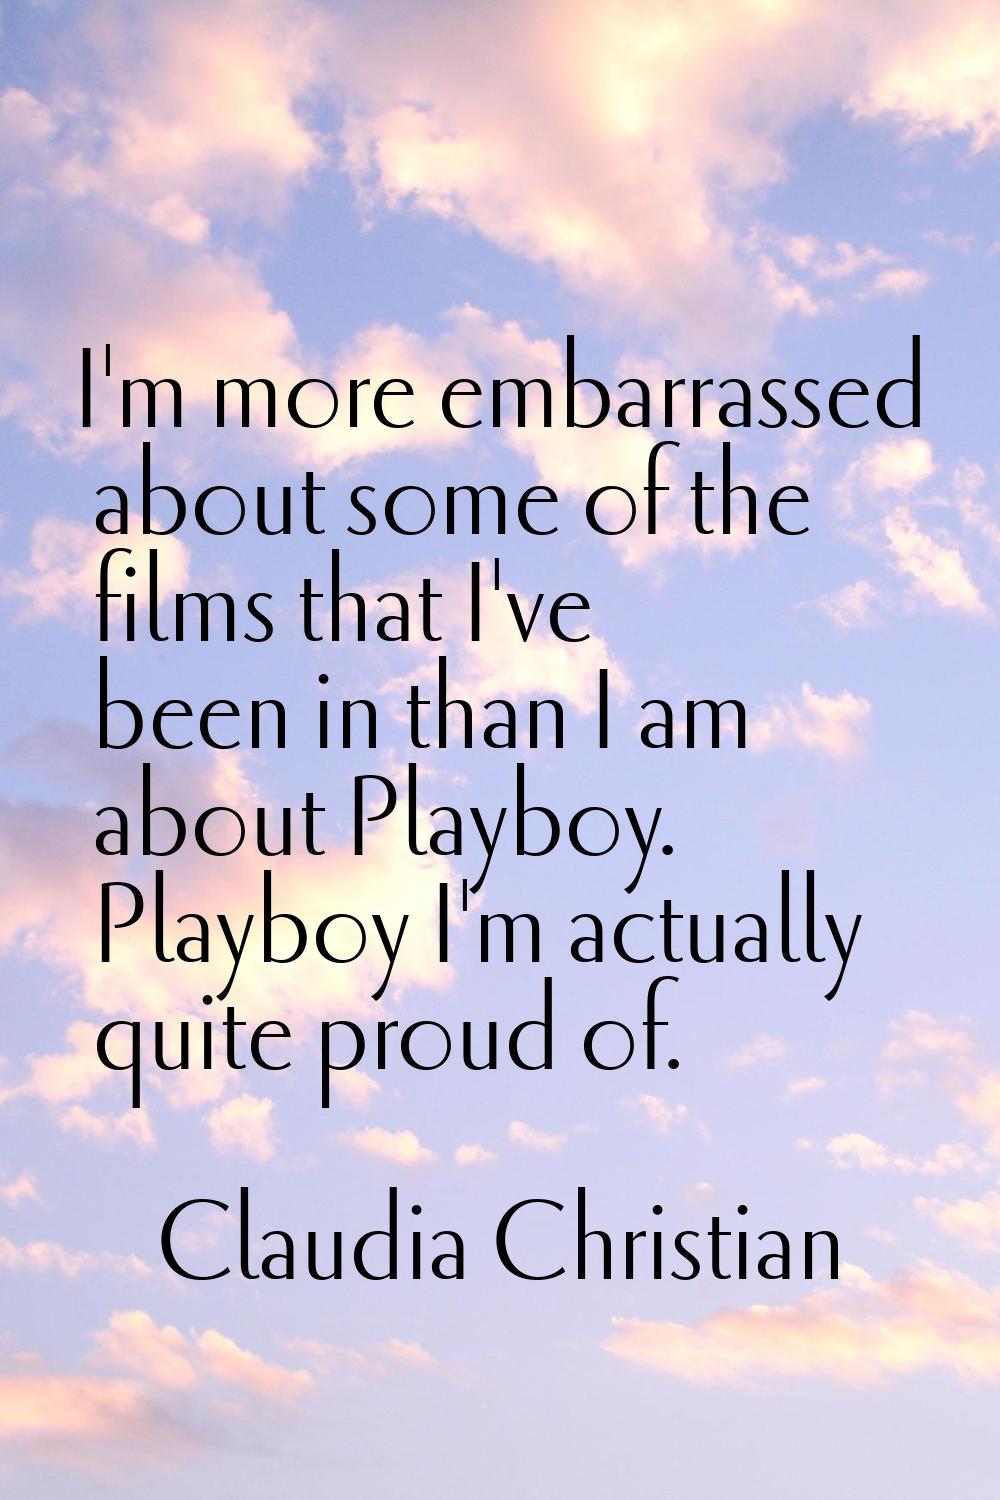 I'm more embarrassed about some of the films that I've been in than I am about Playboy. Playboy I'm